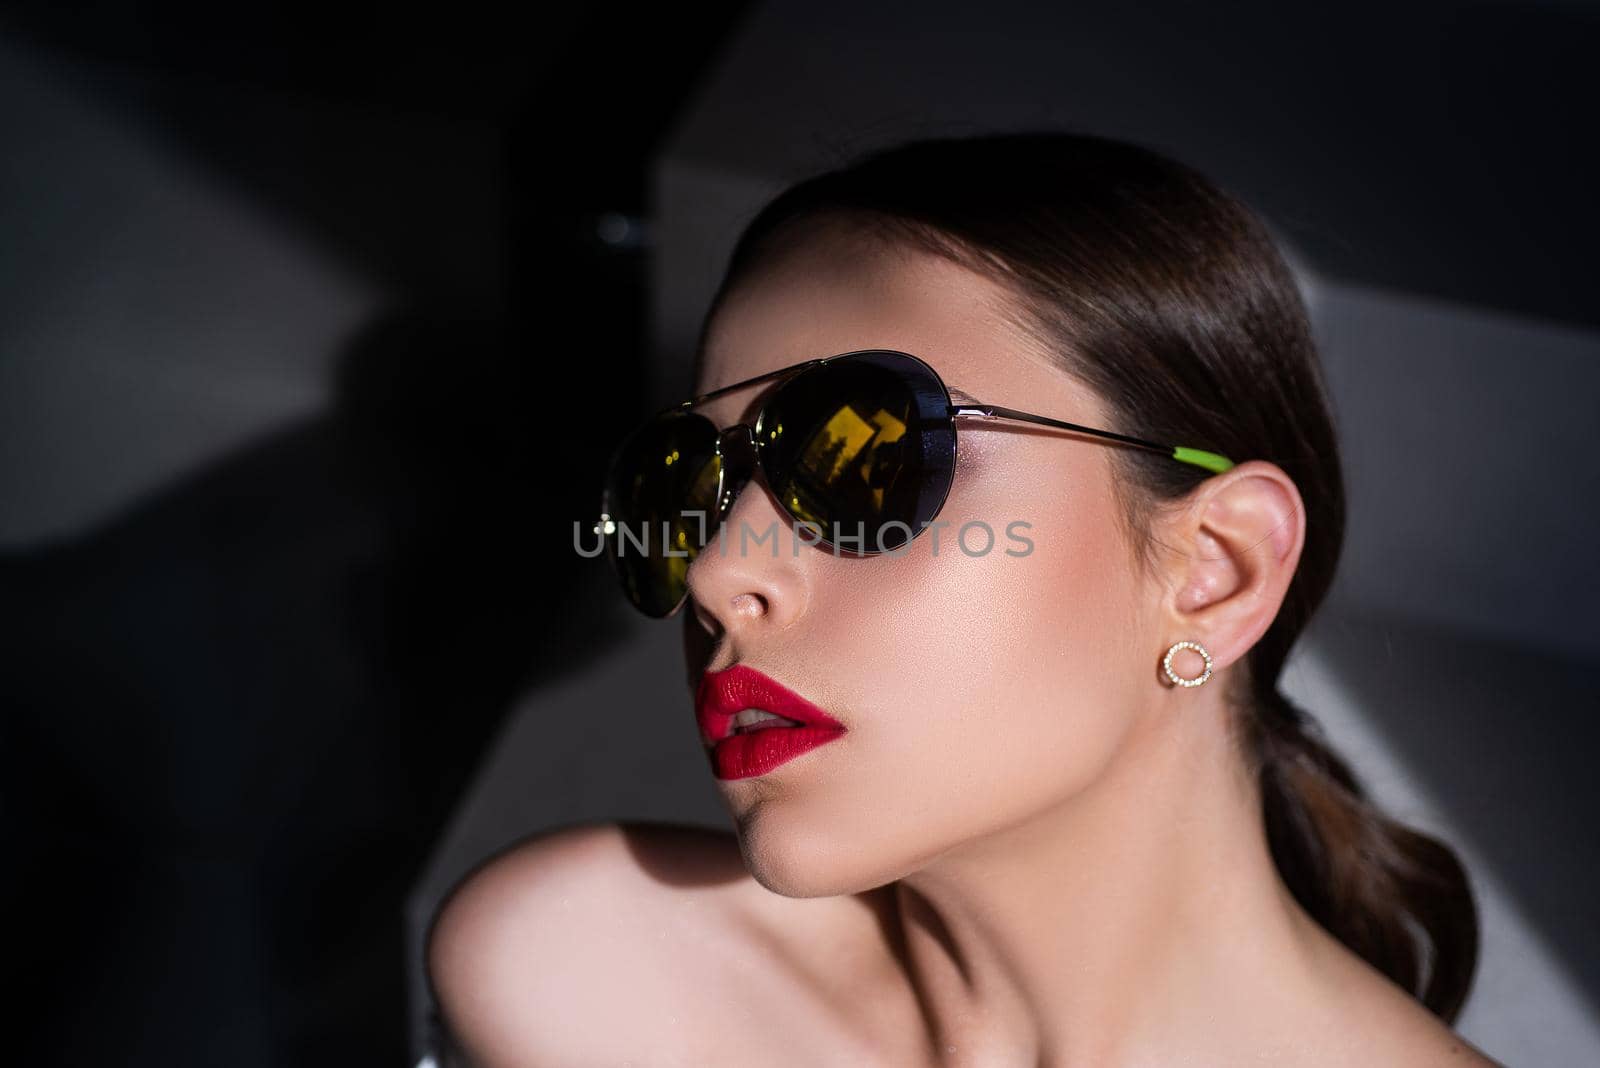 Elegant chic female model in fashion sunglasses with red lips. Portrait of serious woman in the dark isolated. Young woman posing. Portrait of a young woman in sunglasses